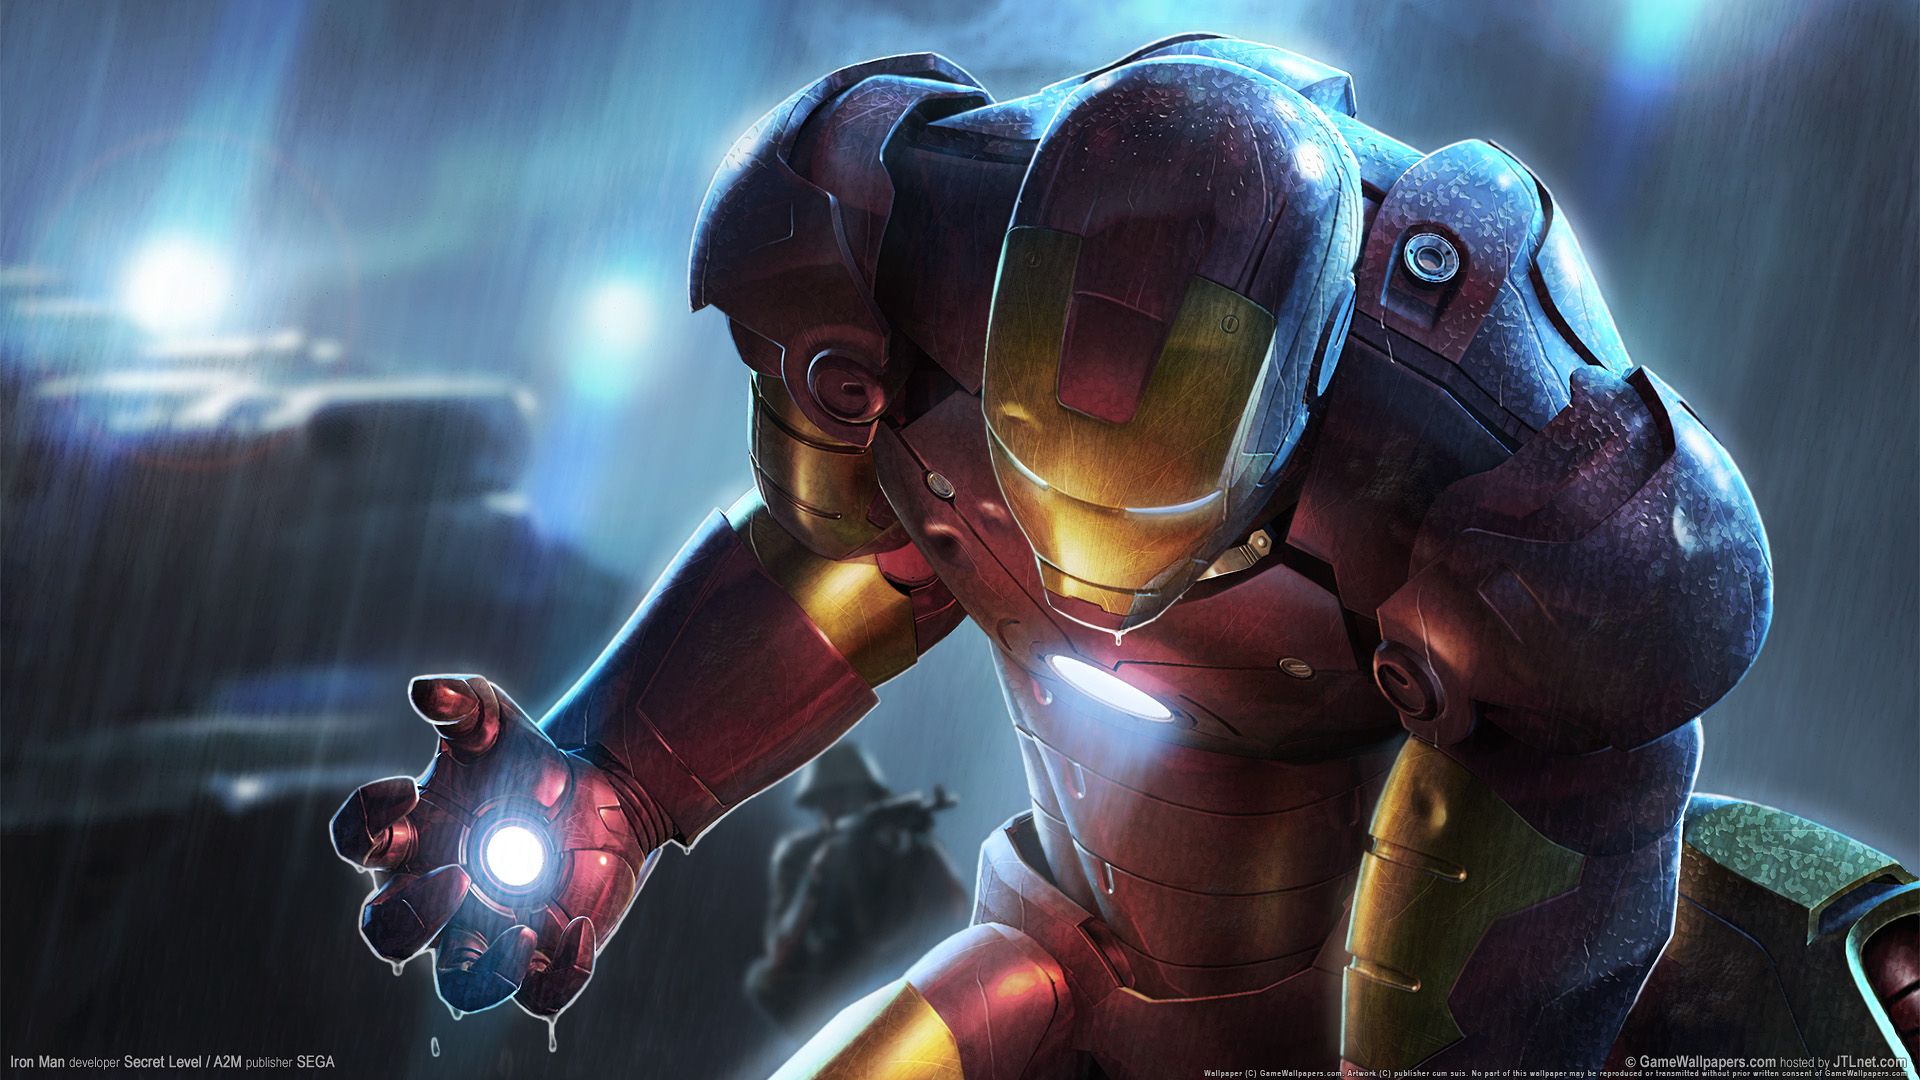 Iron Man 2 Photo Inspiration Pack, 10 Hi Quality Pictures